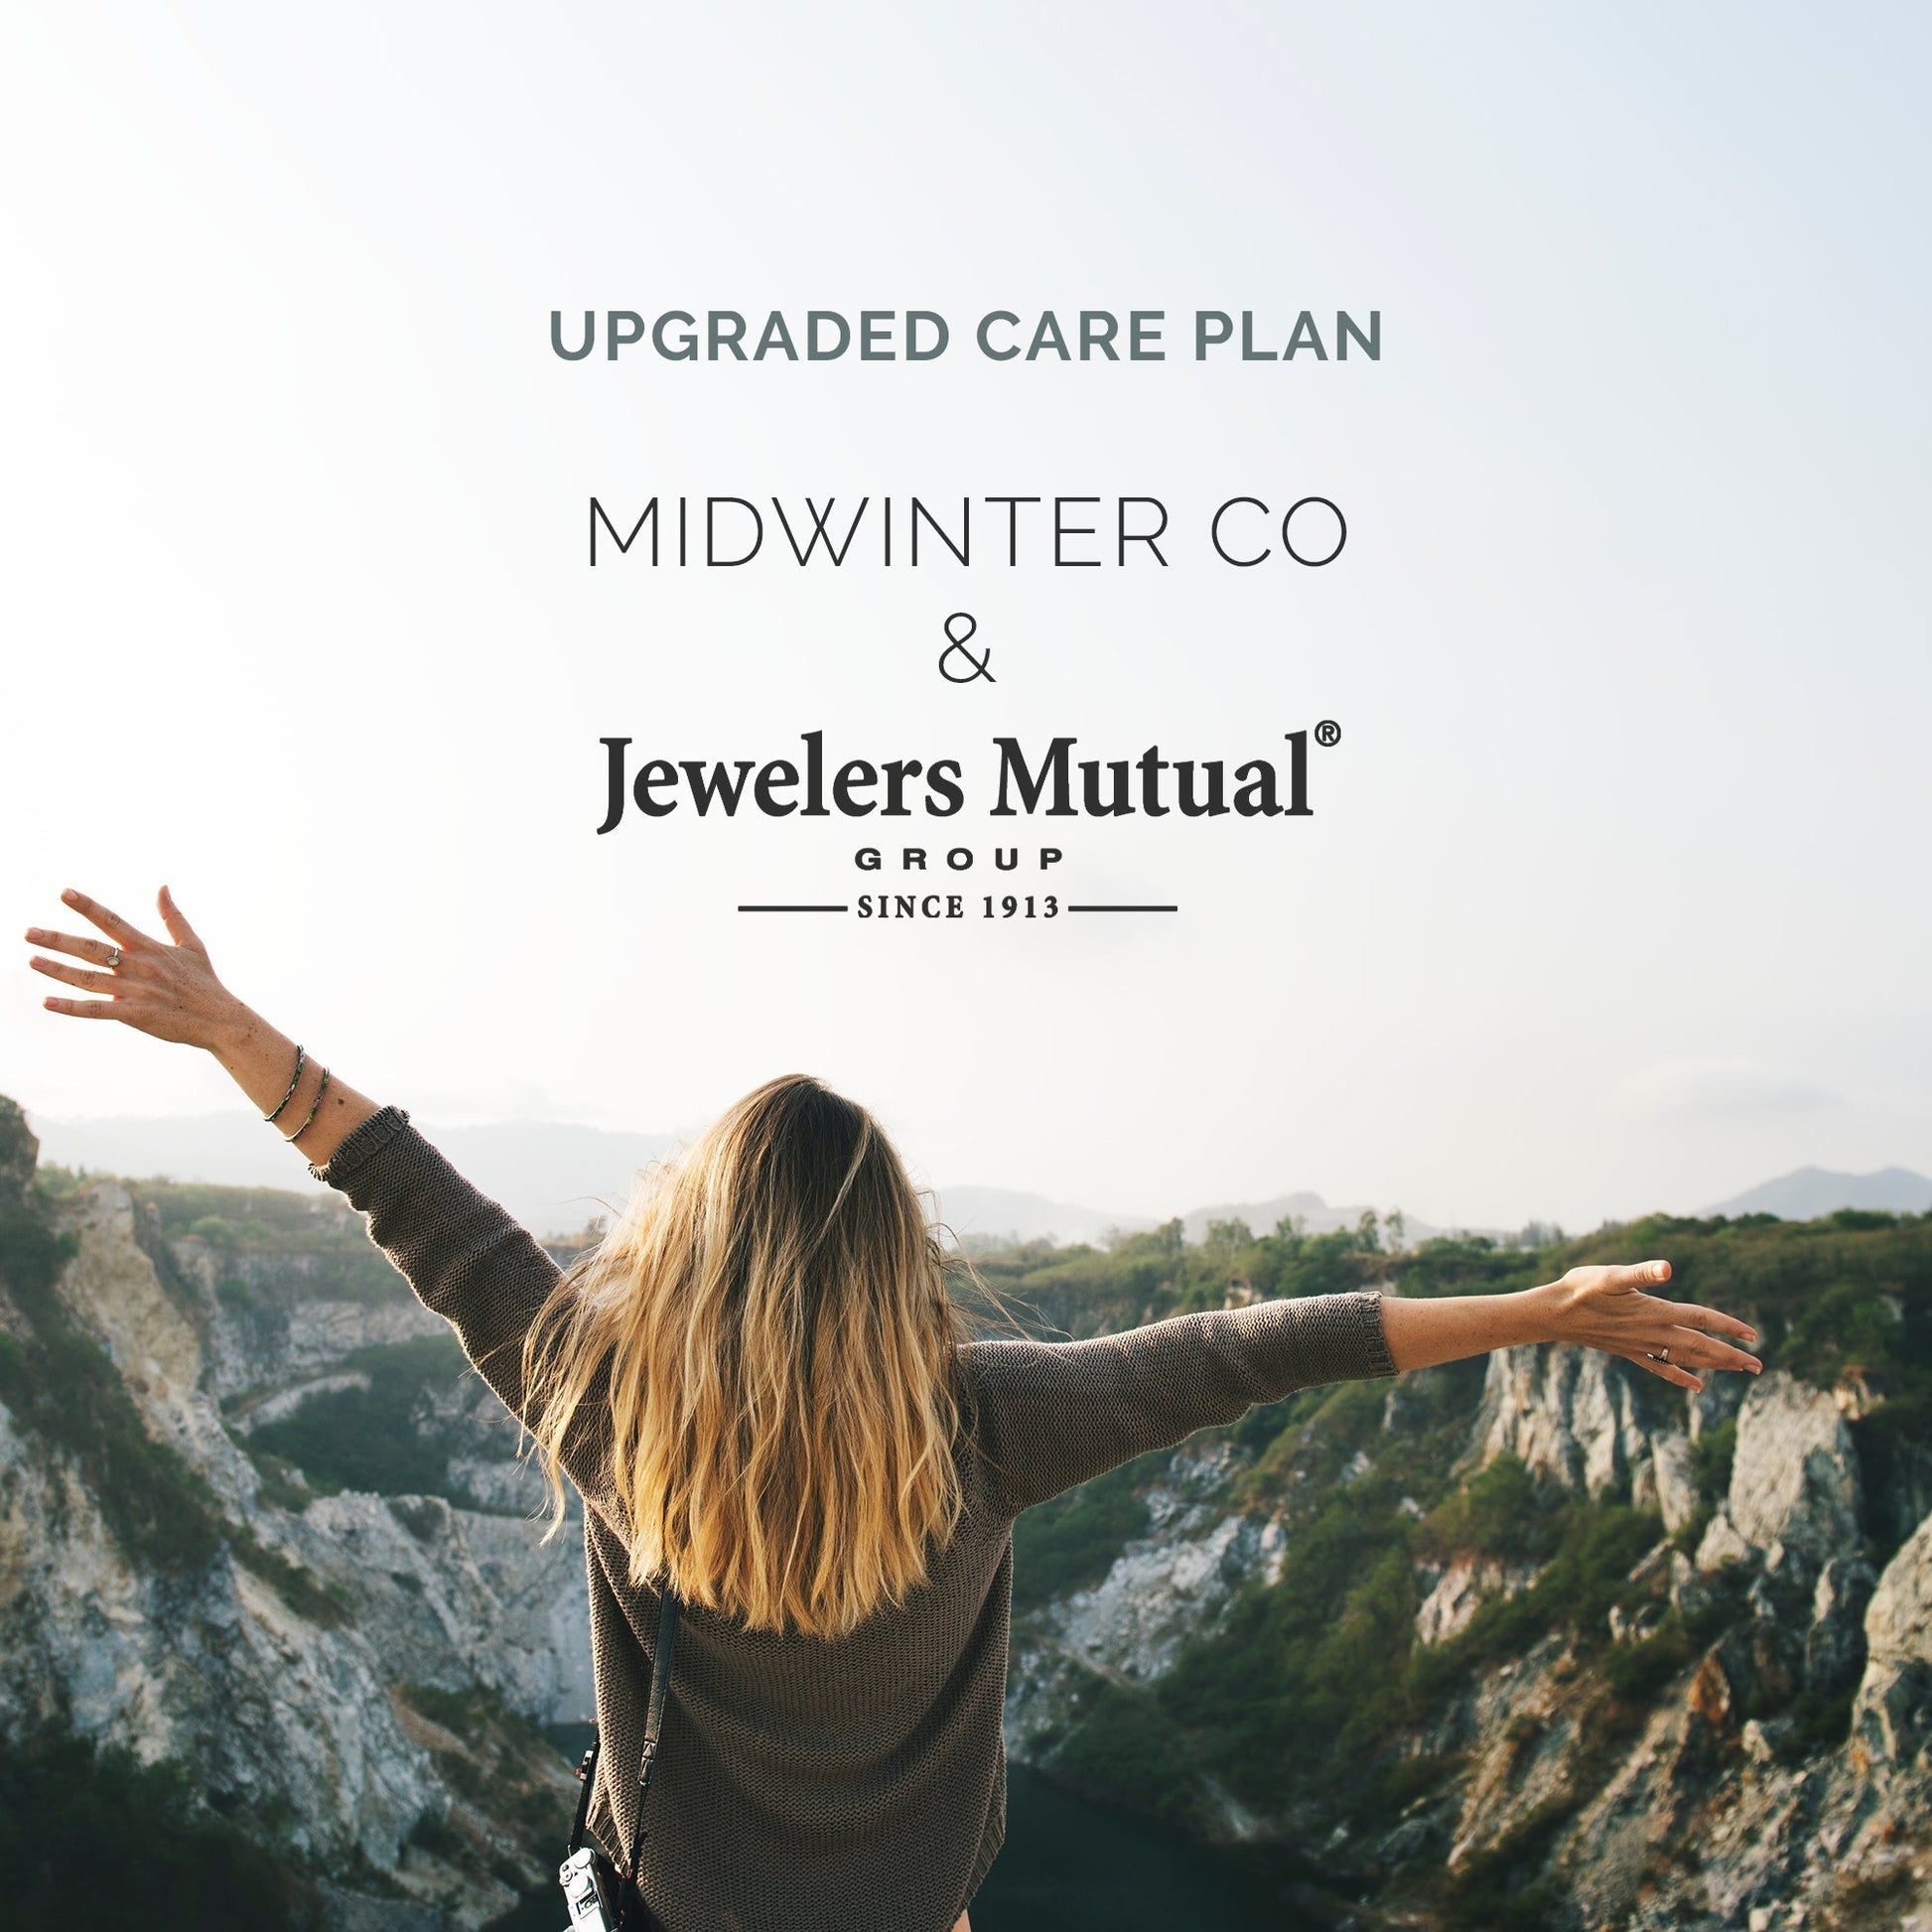 Care Plan Warranty - Jeweler's Mutual - LIFETIME COVERAGE - Midwinter Co. Alternative Bridal Rings and Modern Fine Jewelry